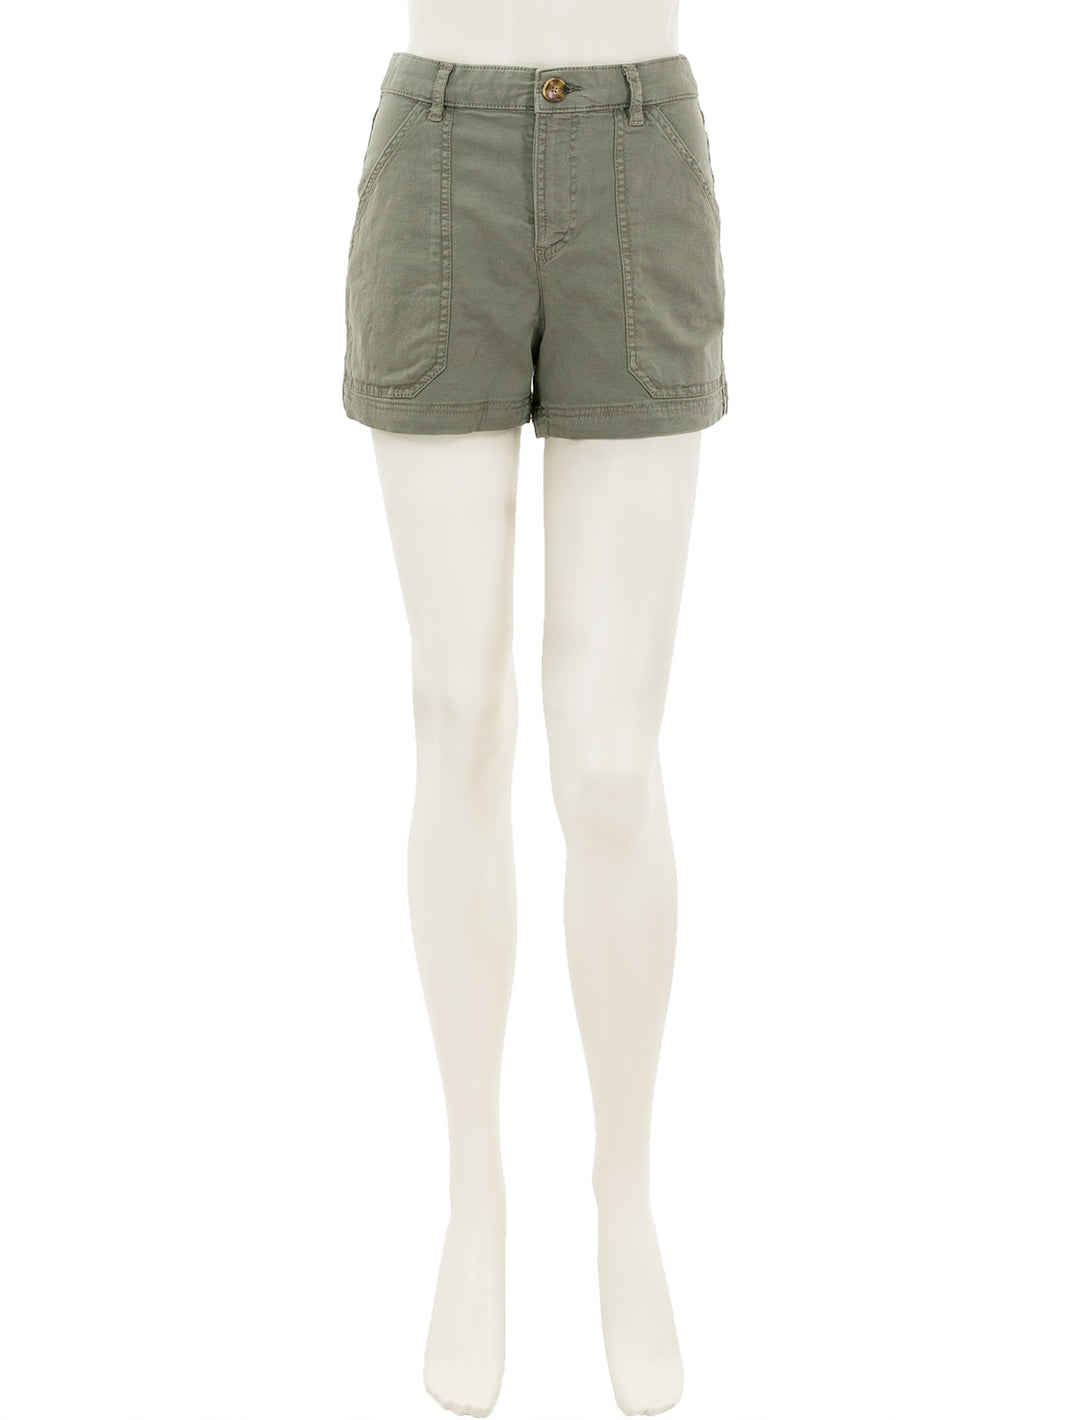 Front view of Marine Layer's maya utility short in olive.